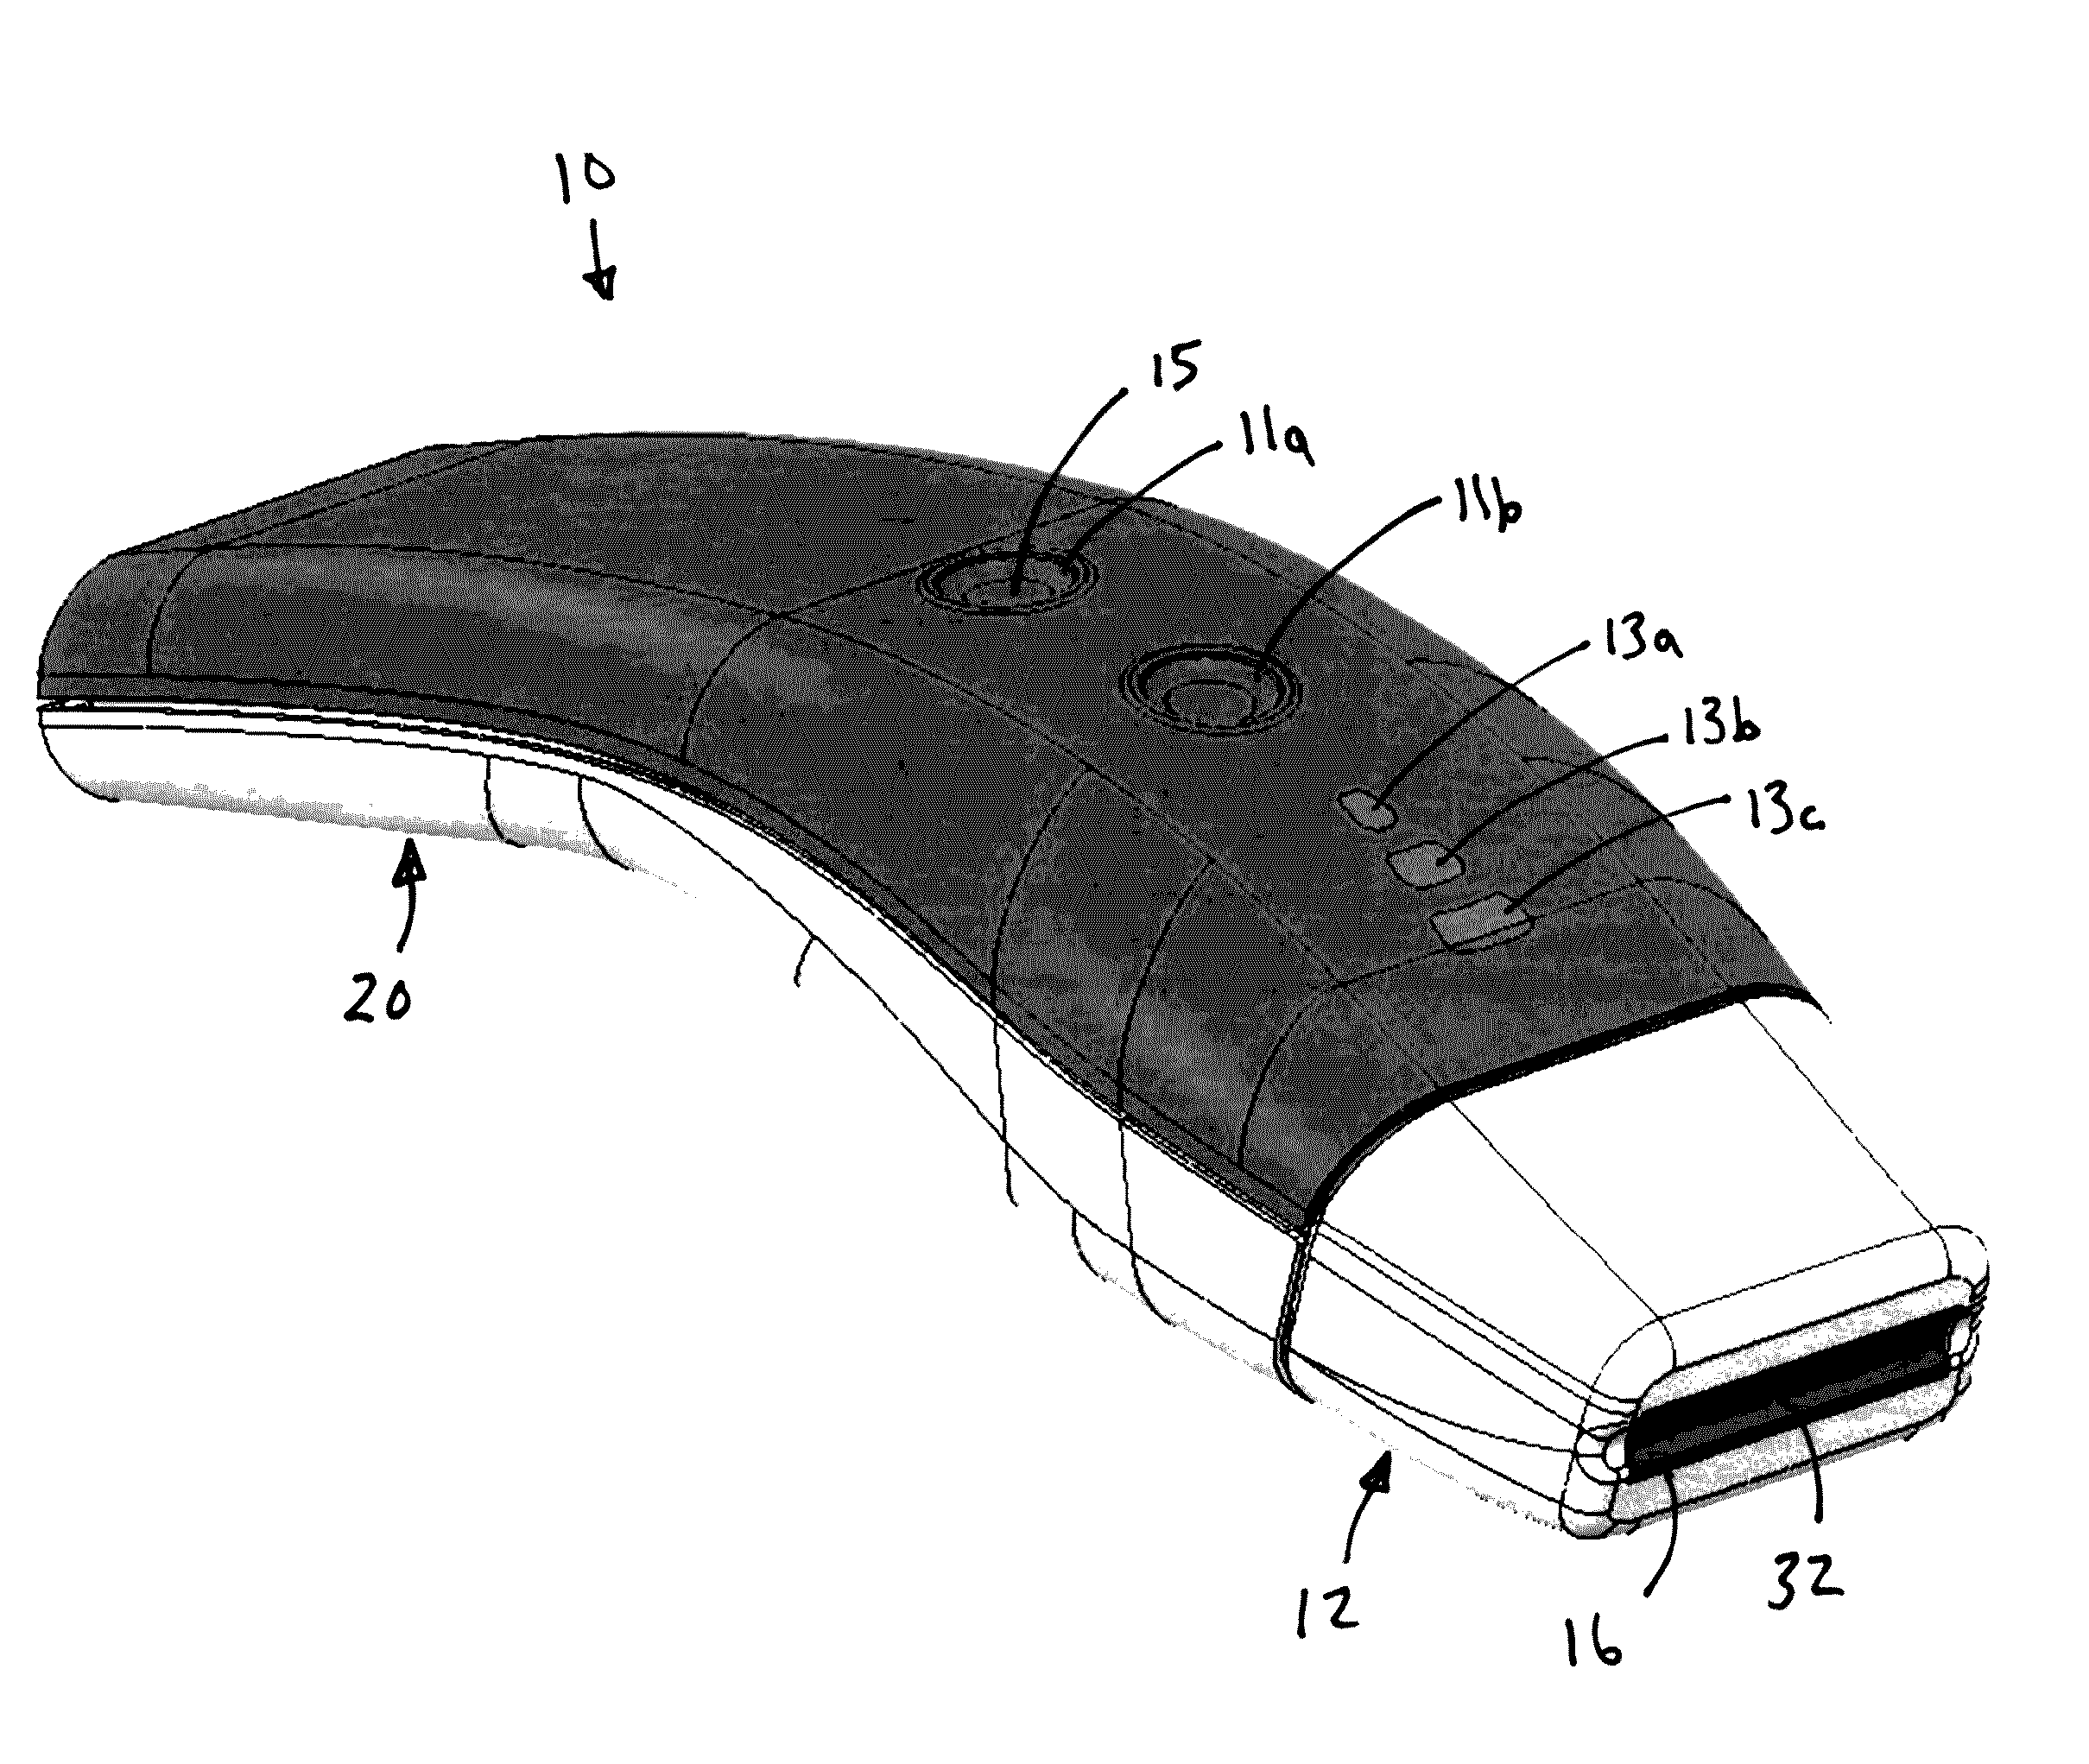 Acoustic module and control system for handheld ultrasound device